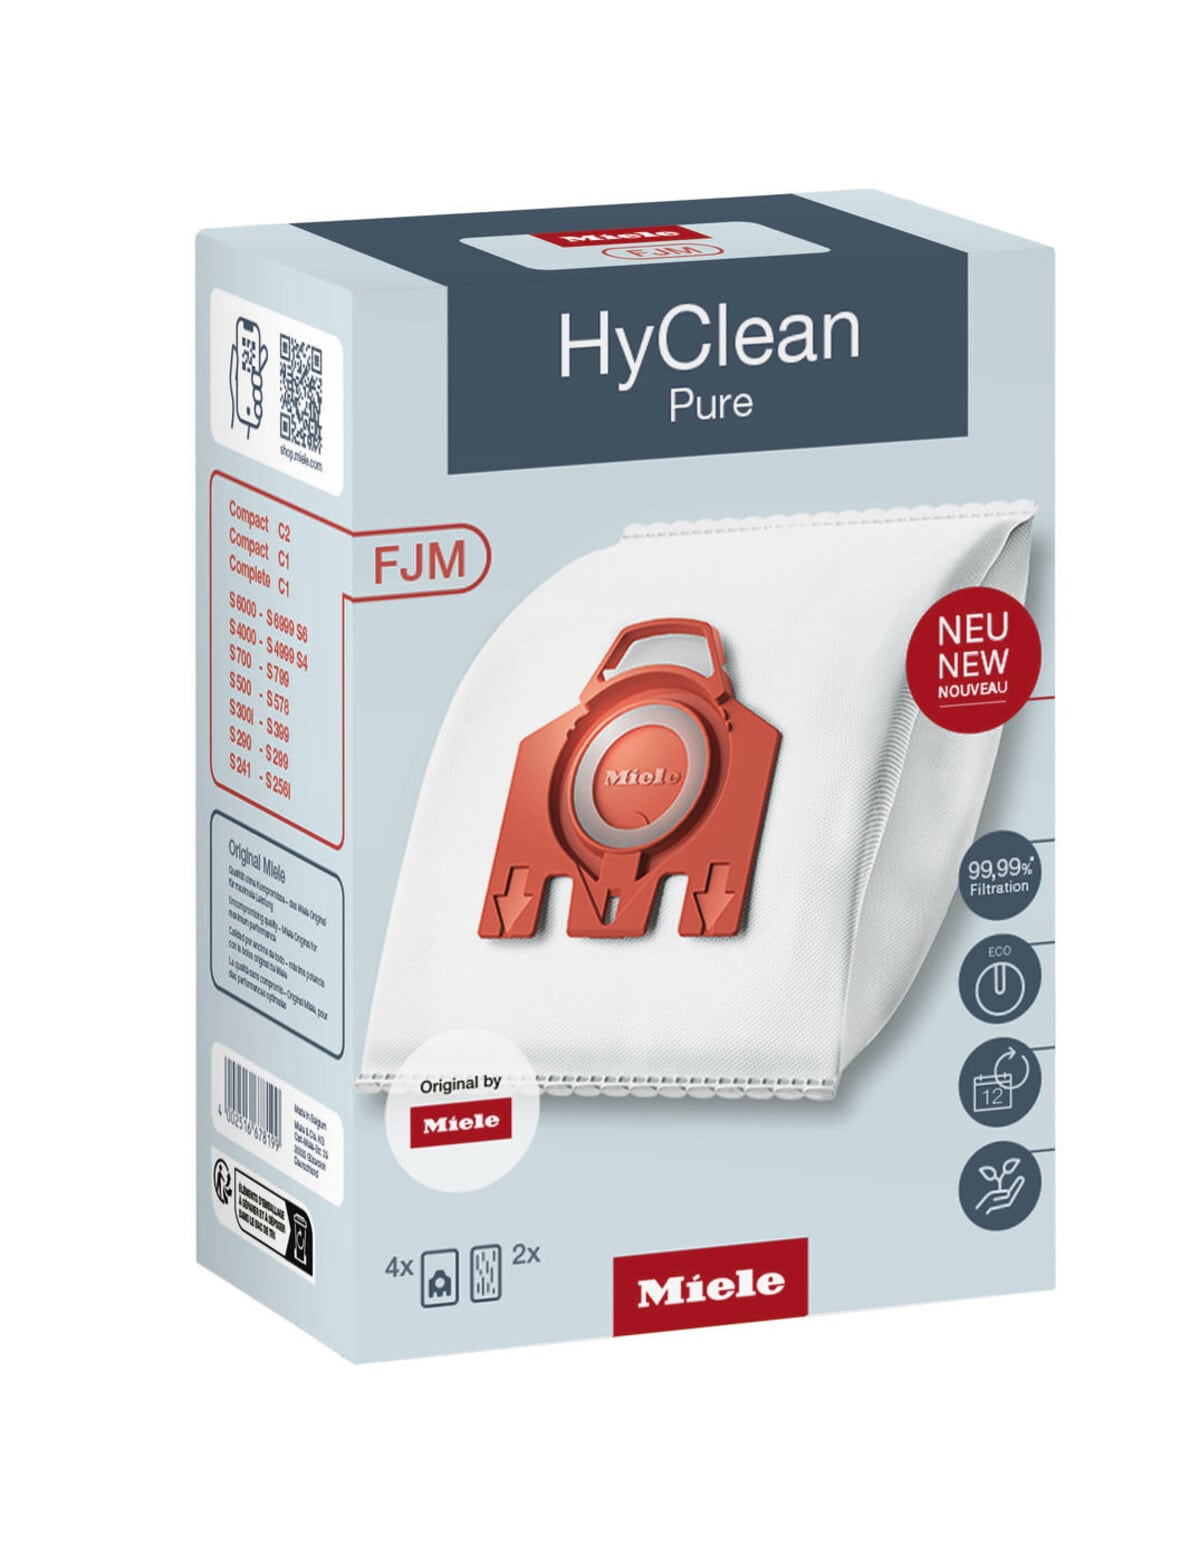 Miele FJM Hyclean Pure Dustbag, 12281690 - Vacuum Cleaners